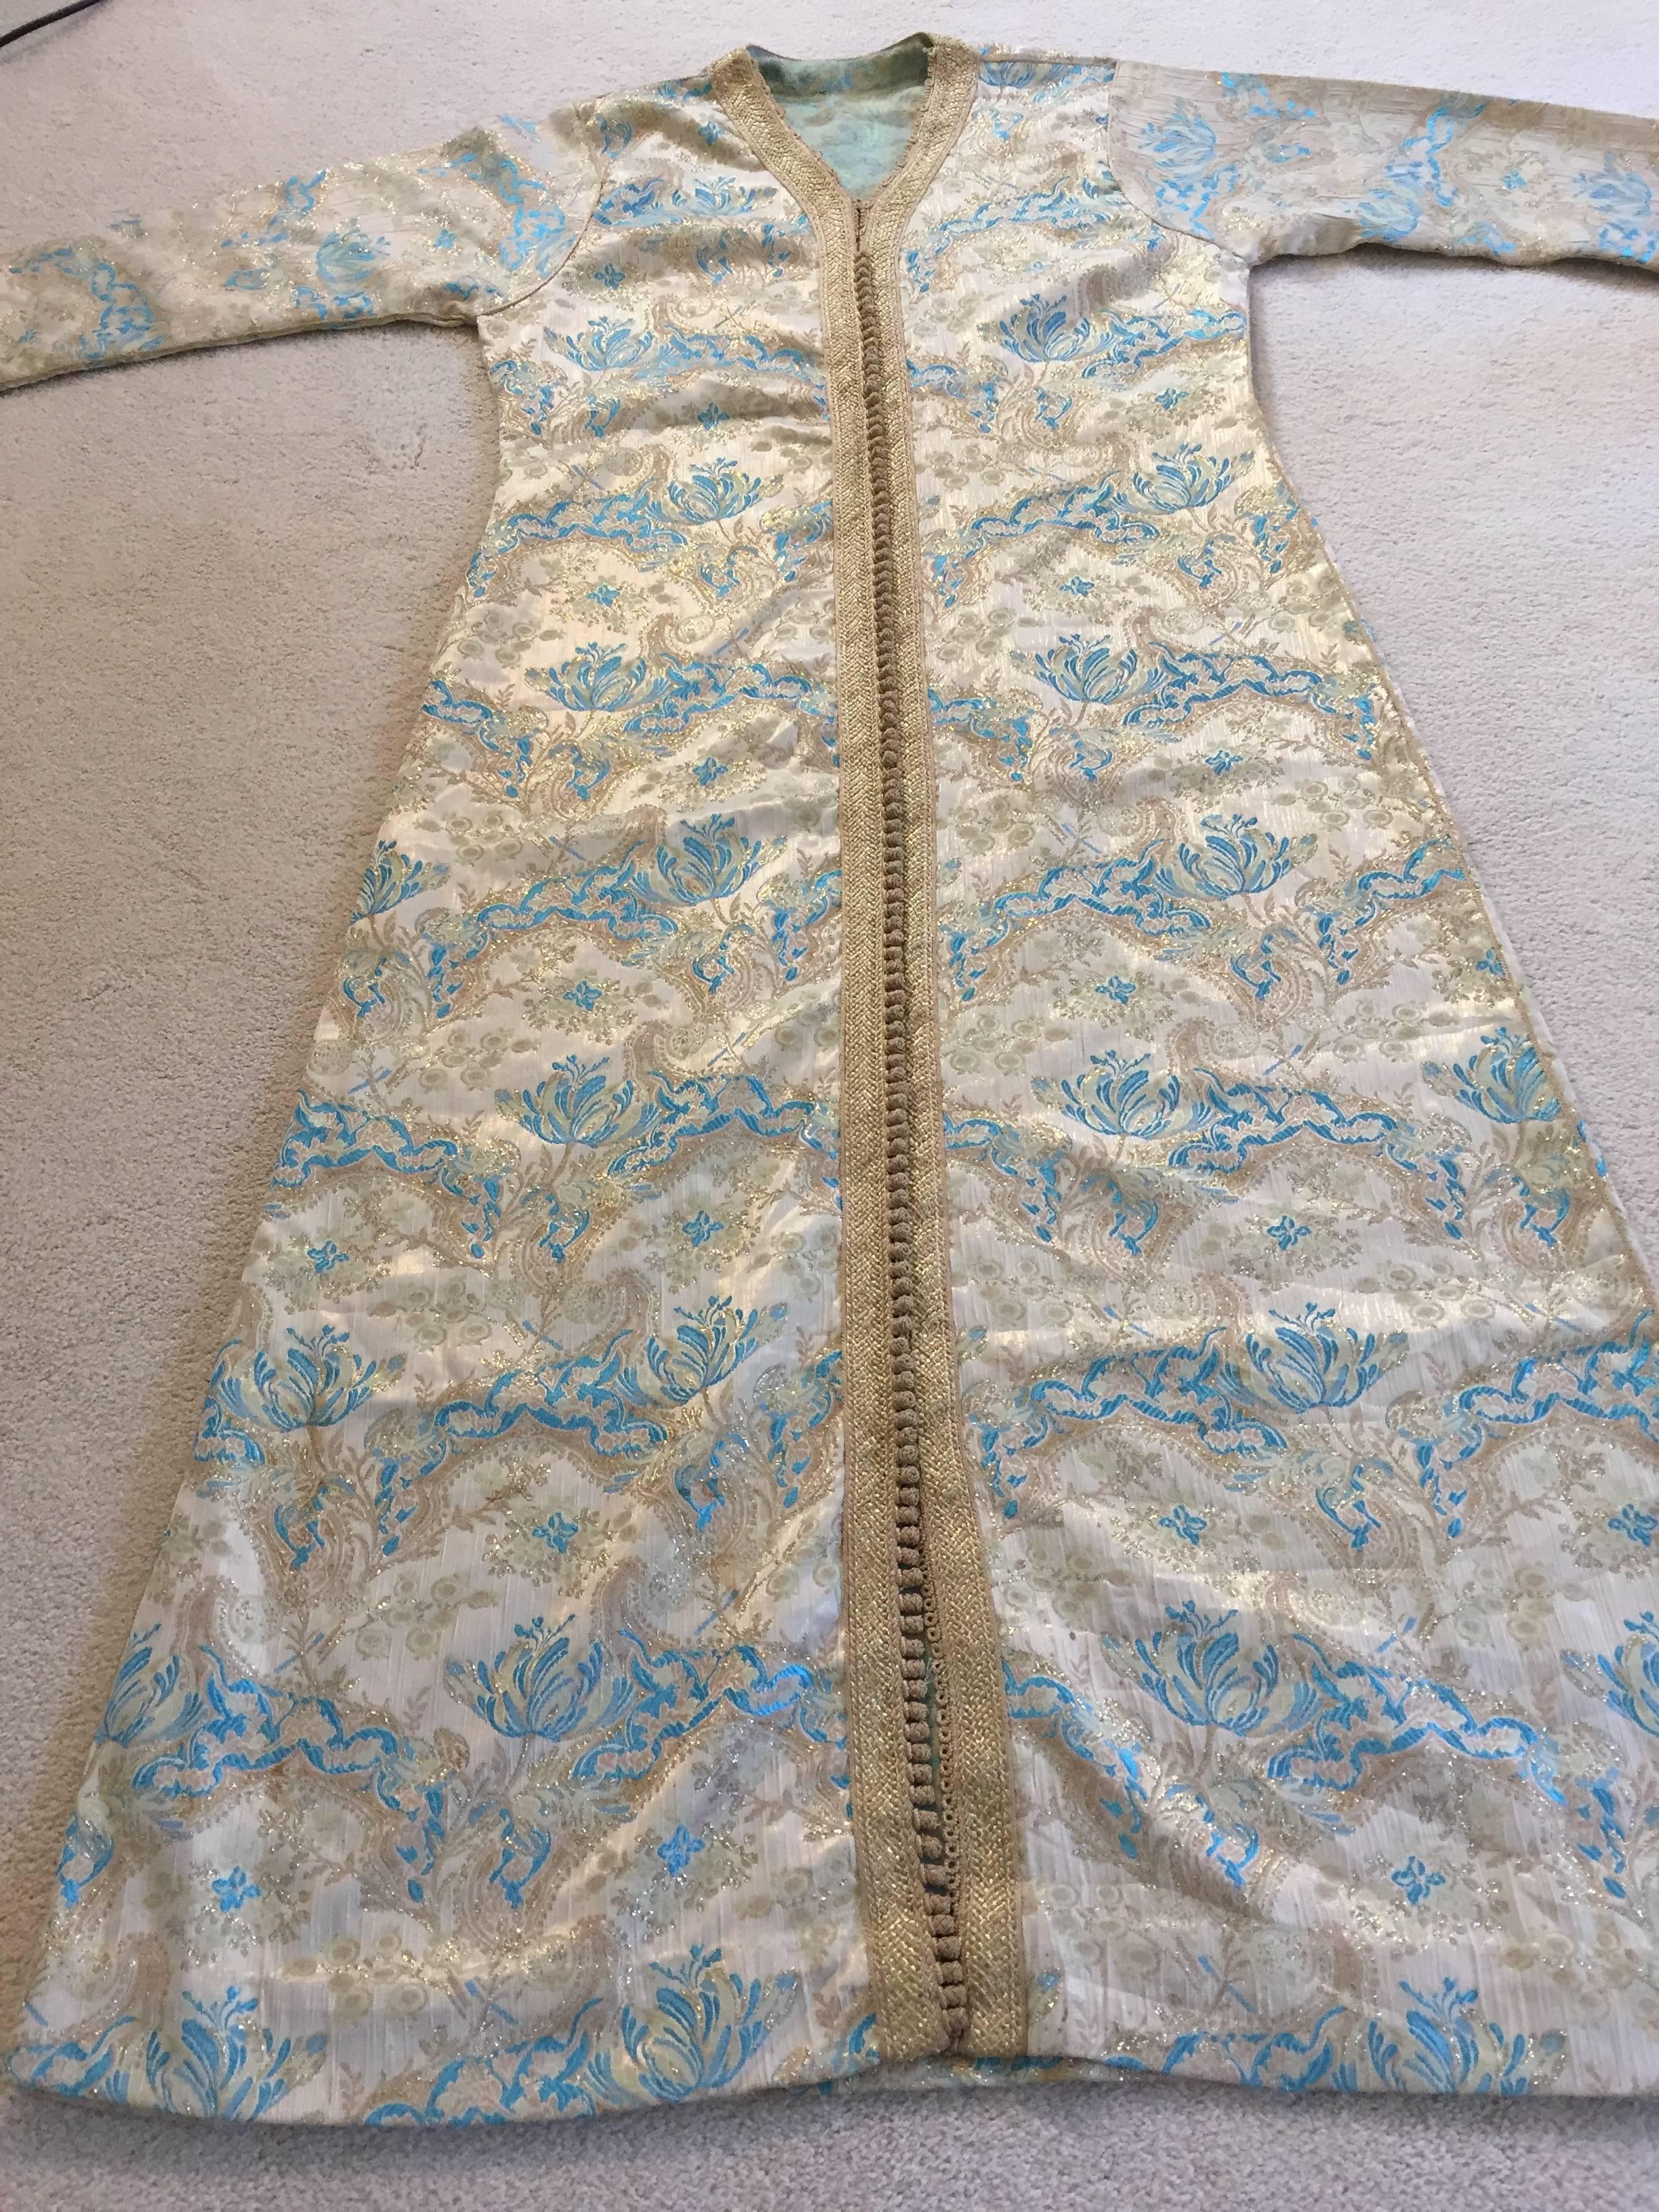 Moroccan Caftan, Turquoise and Gold Brocade Kaftan Size Medium In Good Condition For Sale In North Hollywood, CA